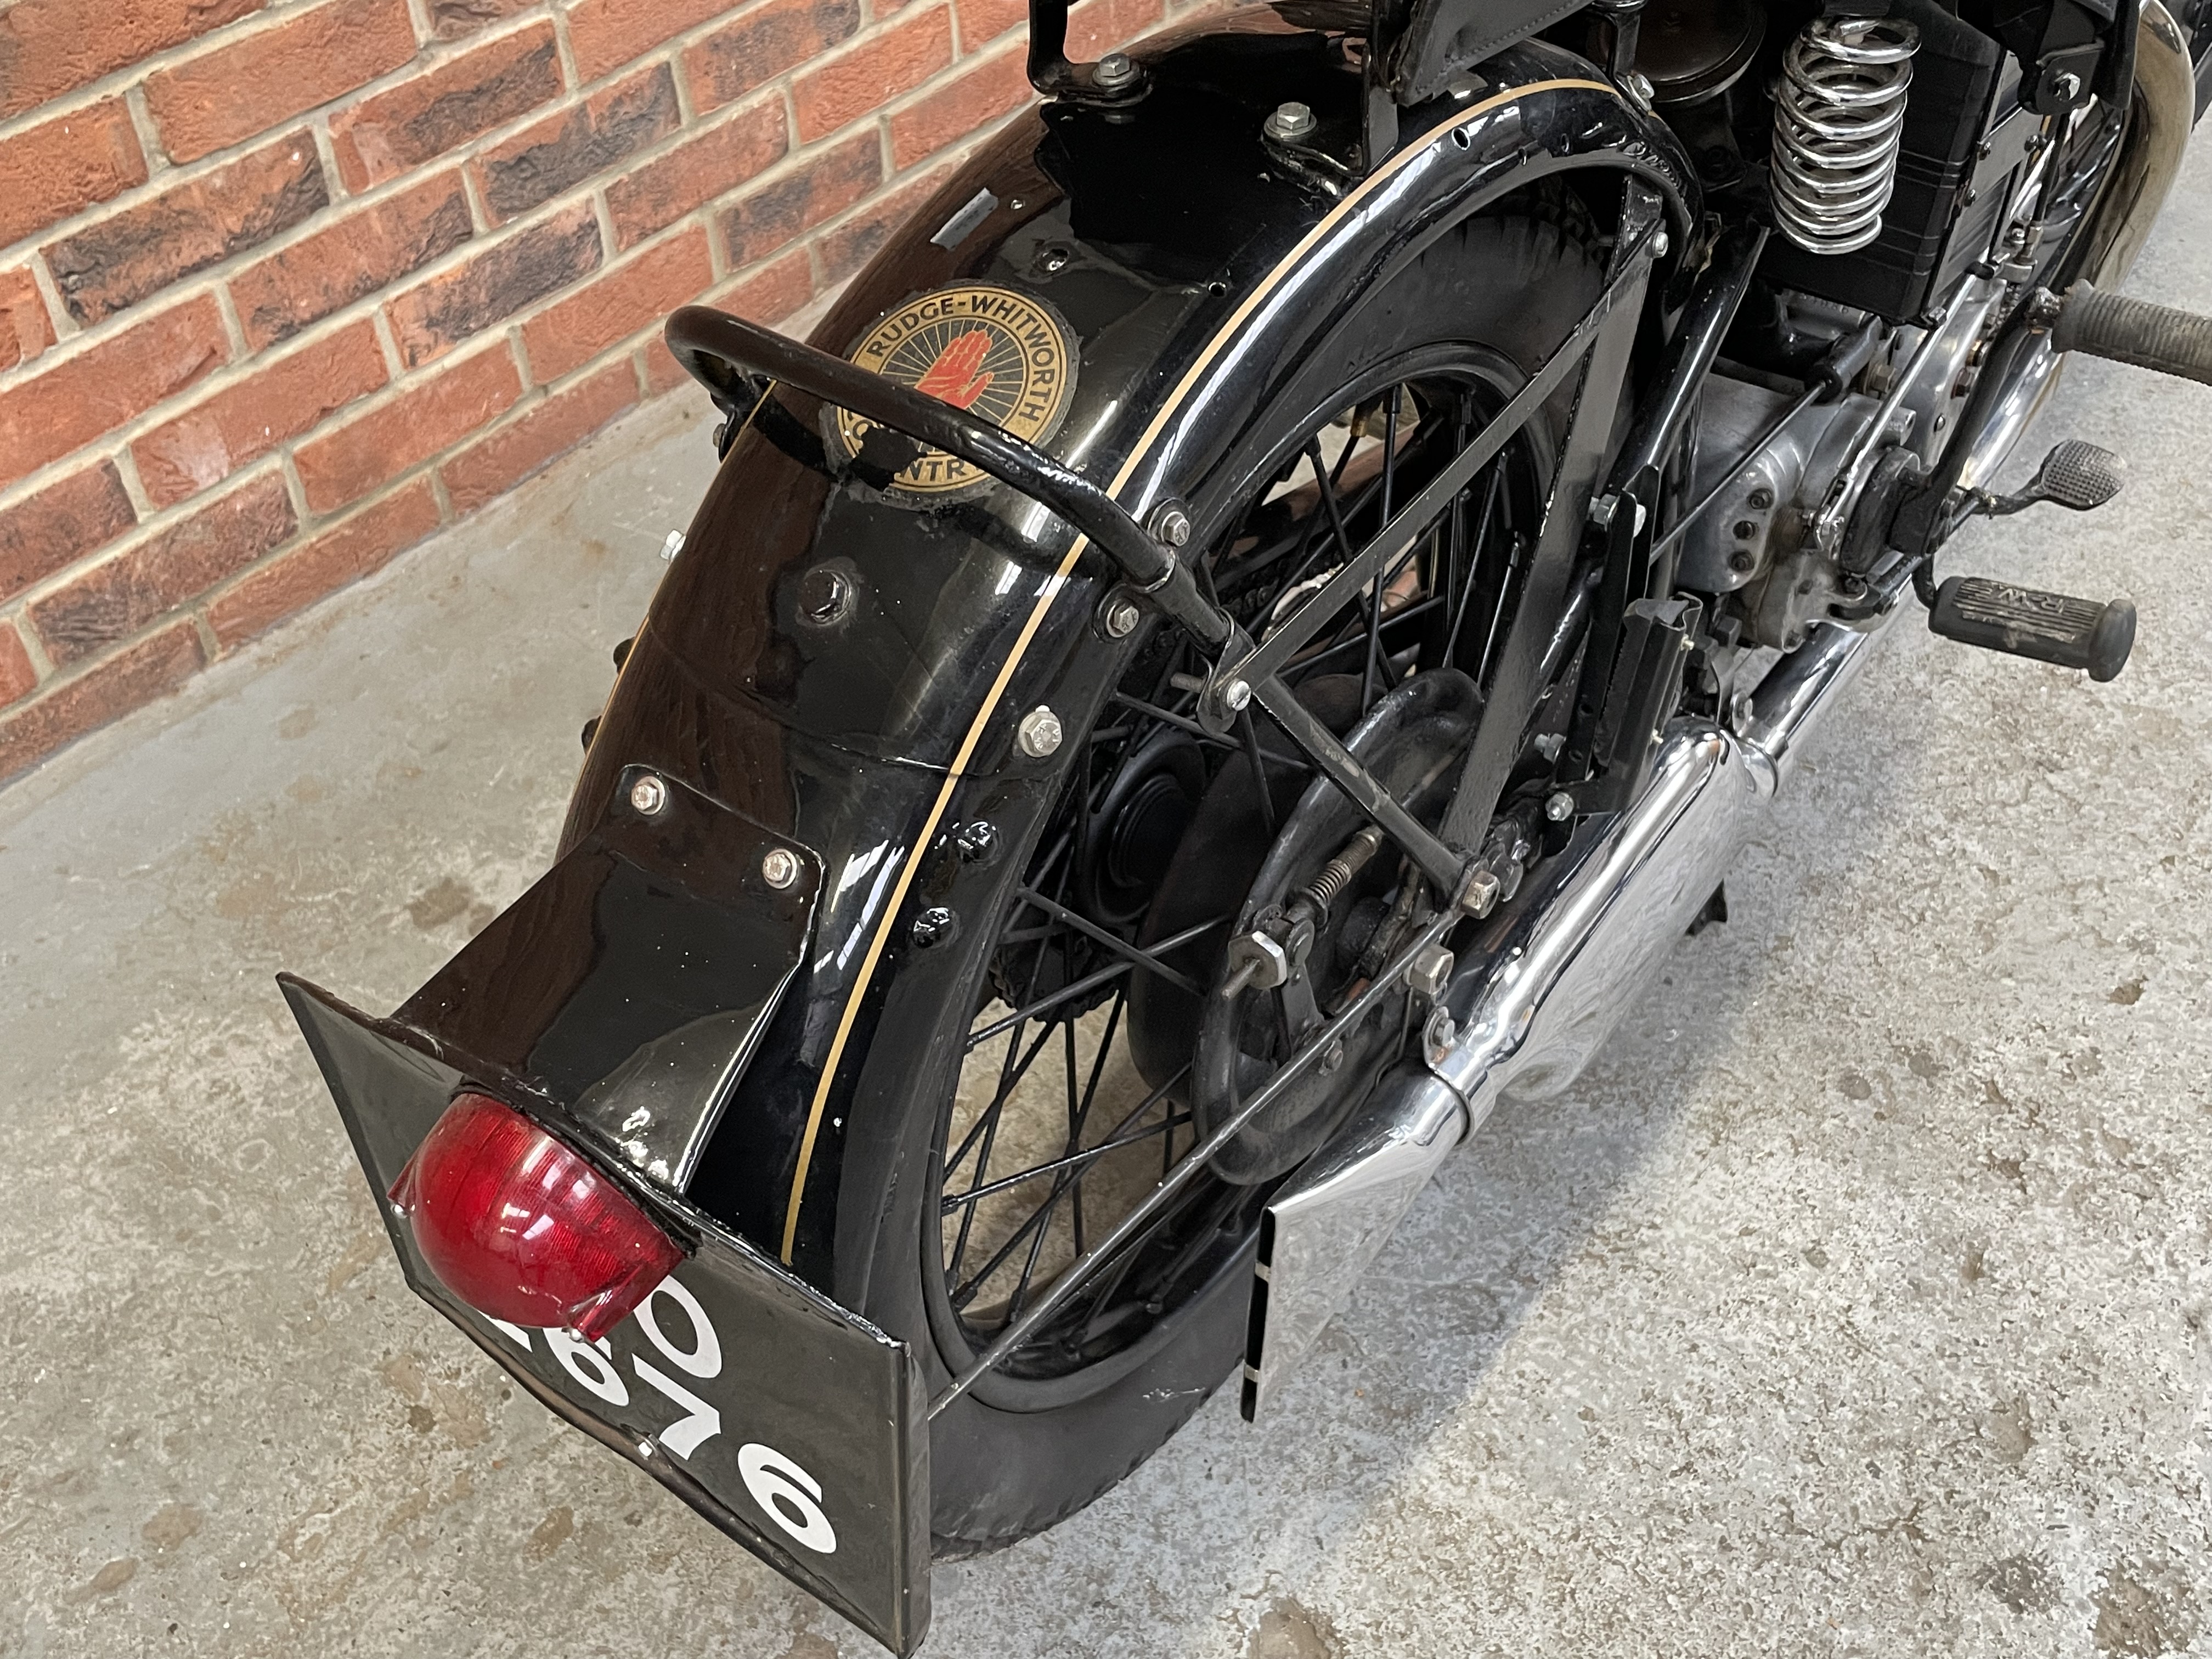 1929 Rudge-Whitworth Special - Image 5 of 12